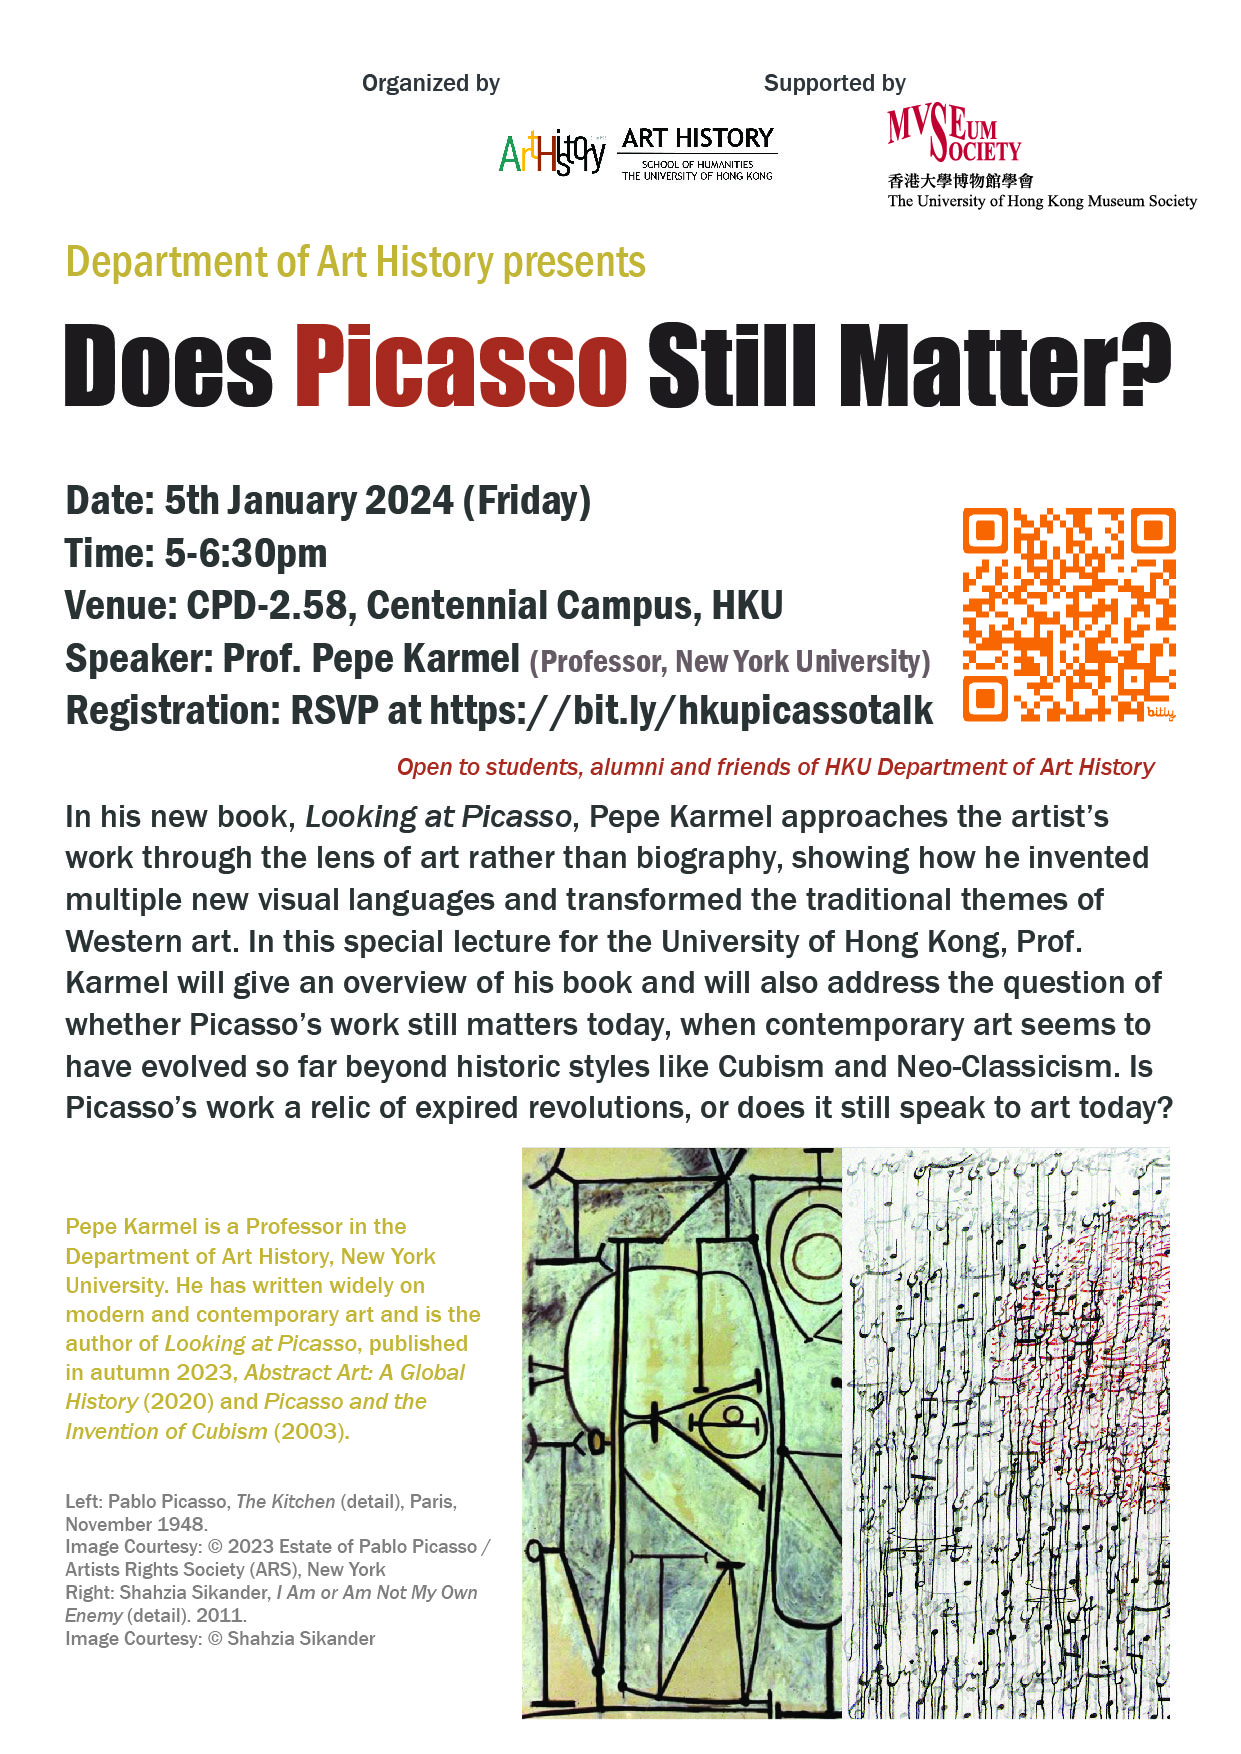 Does Picasso still matter by Prof. Karmel